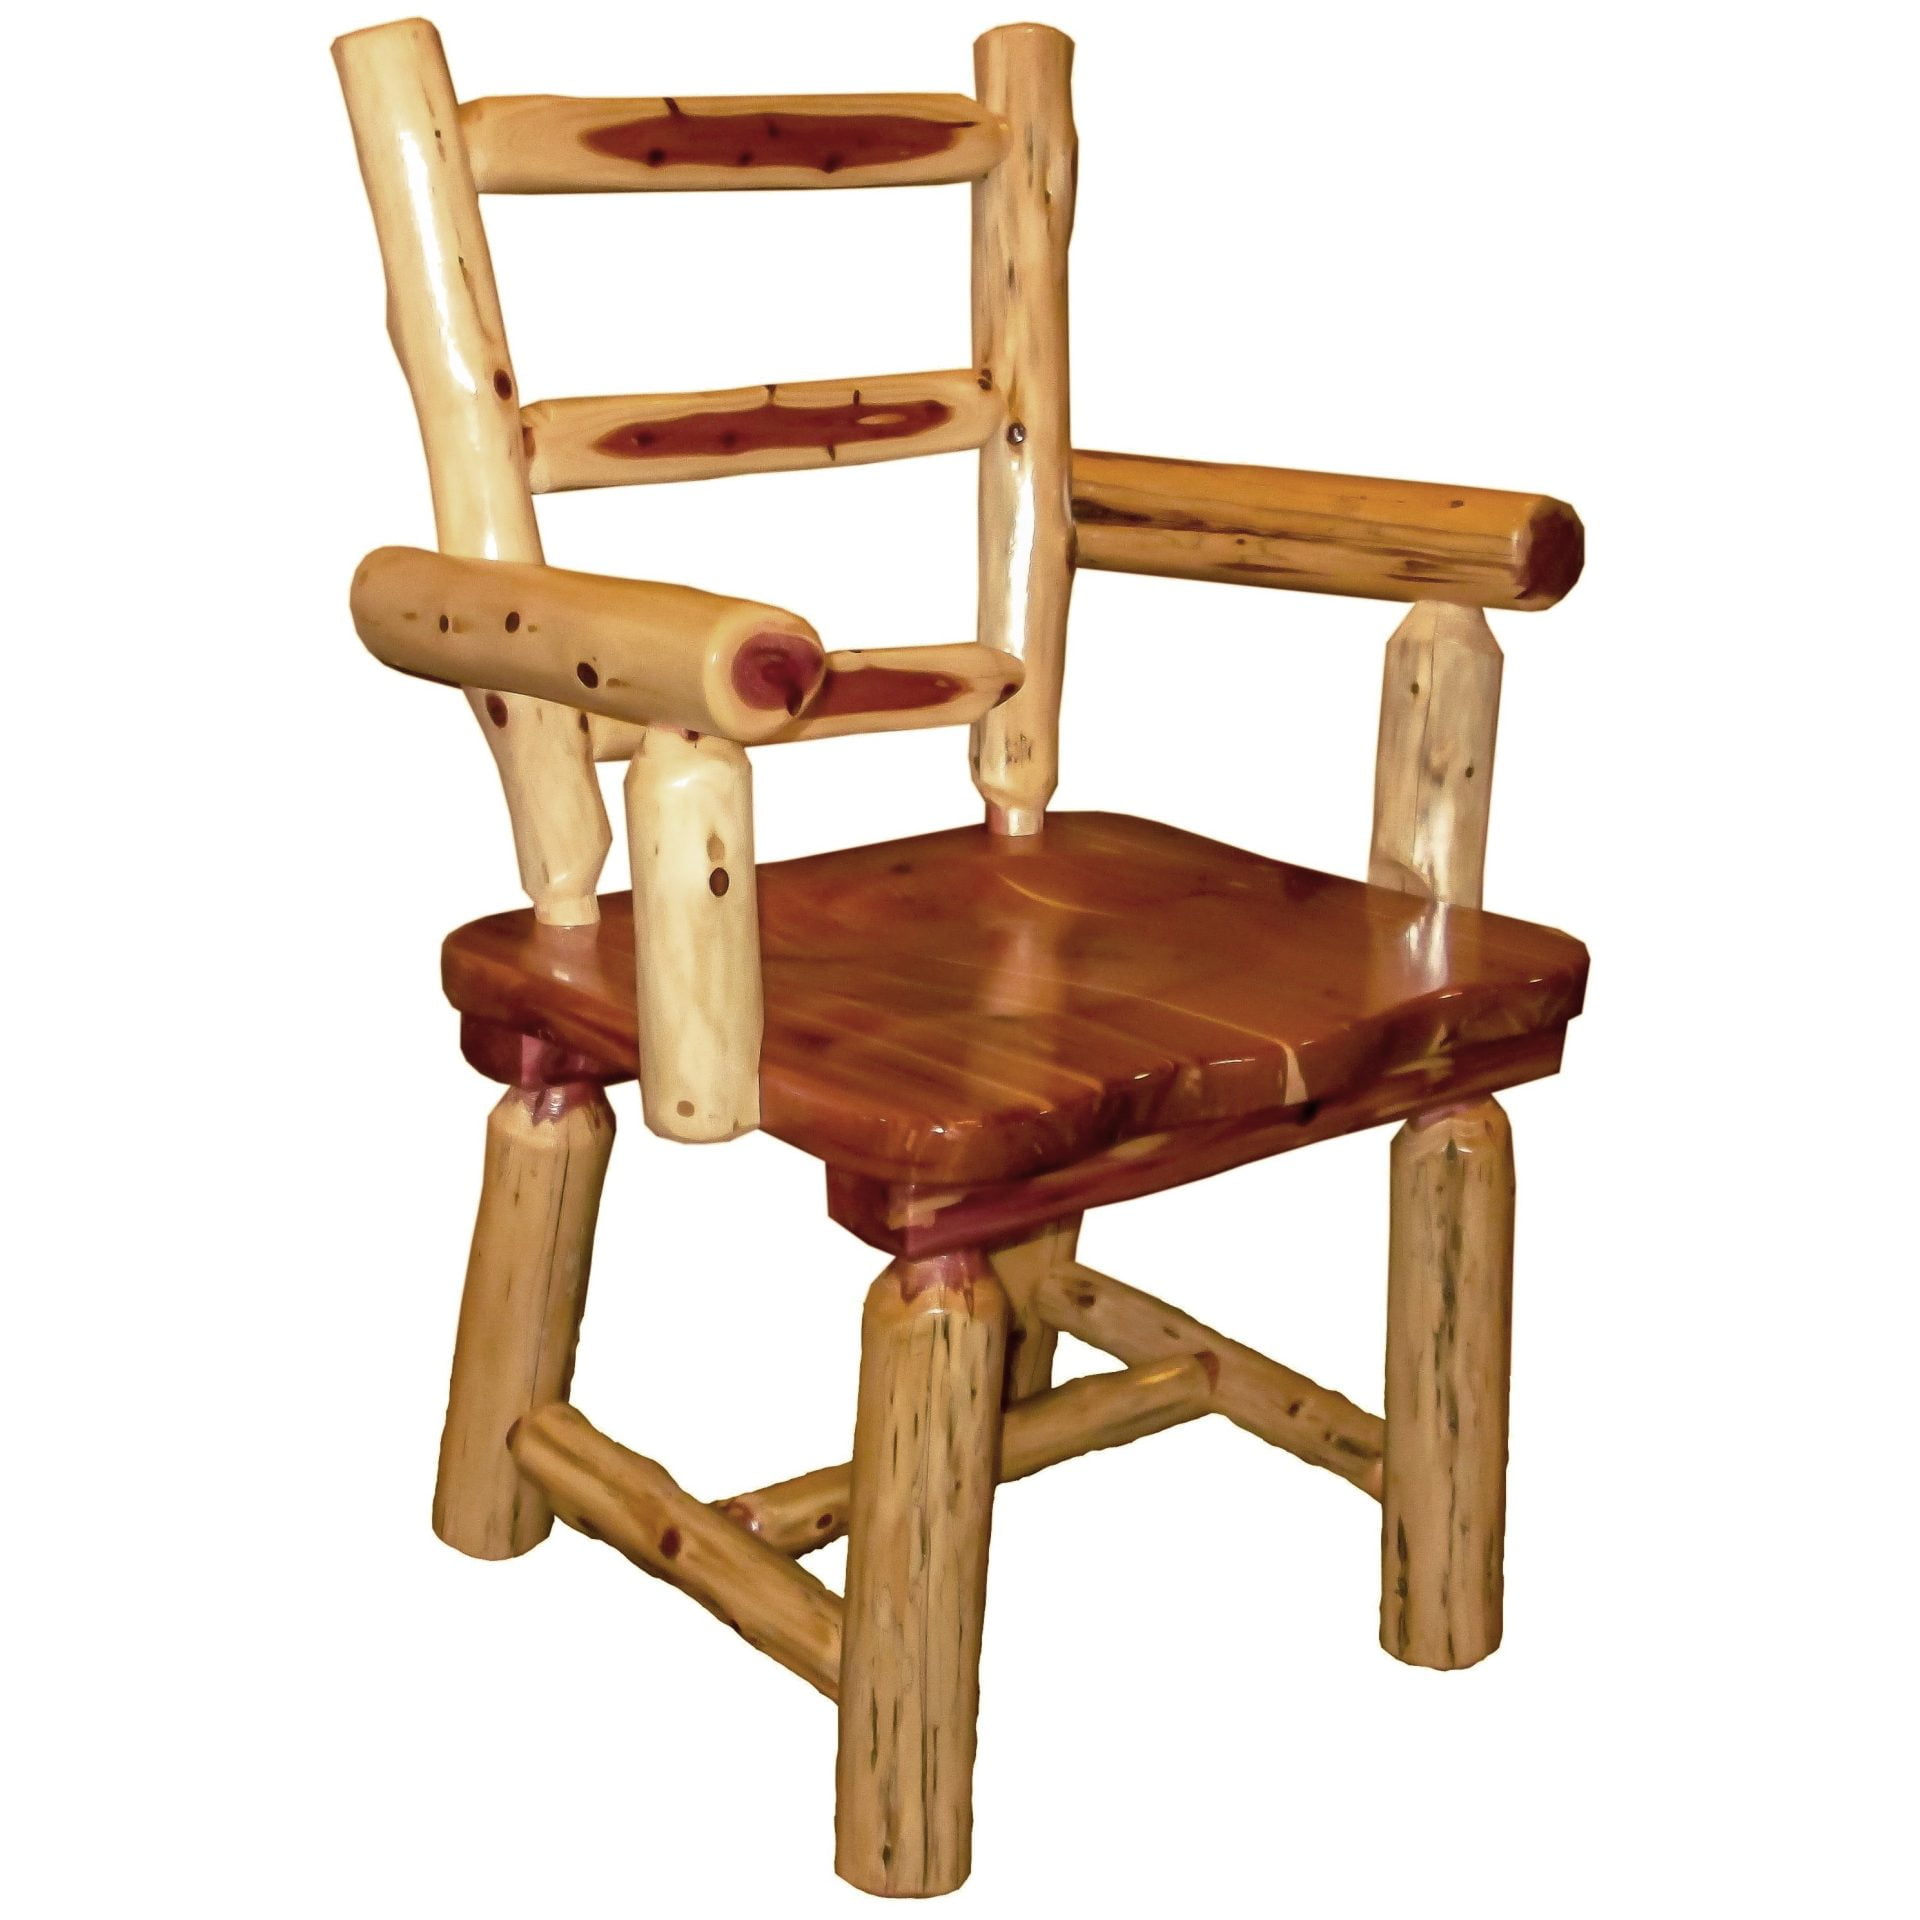 Set of 2 Rustic Red Cedar Log Captain’s Chairs